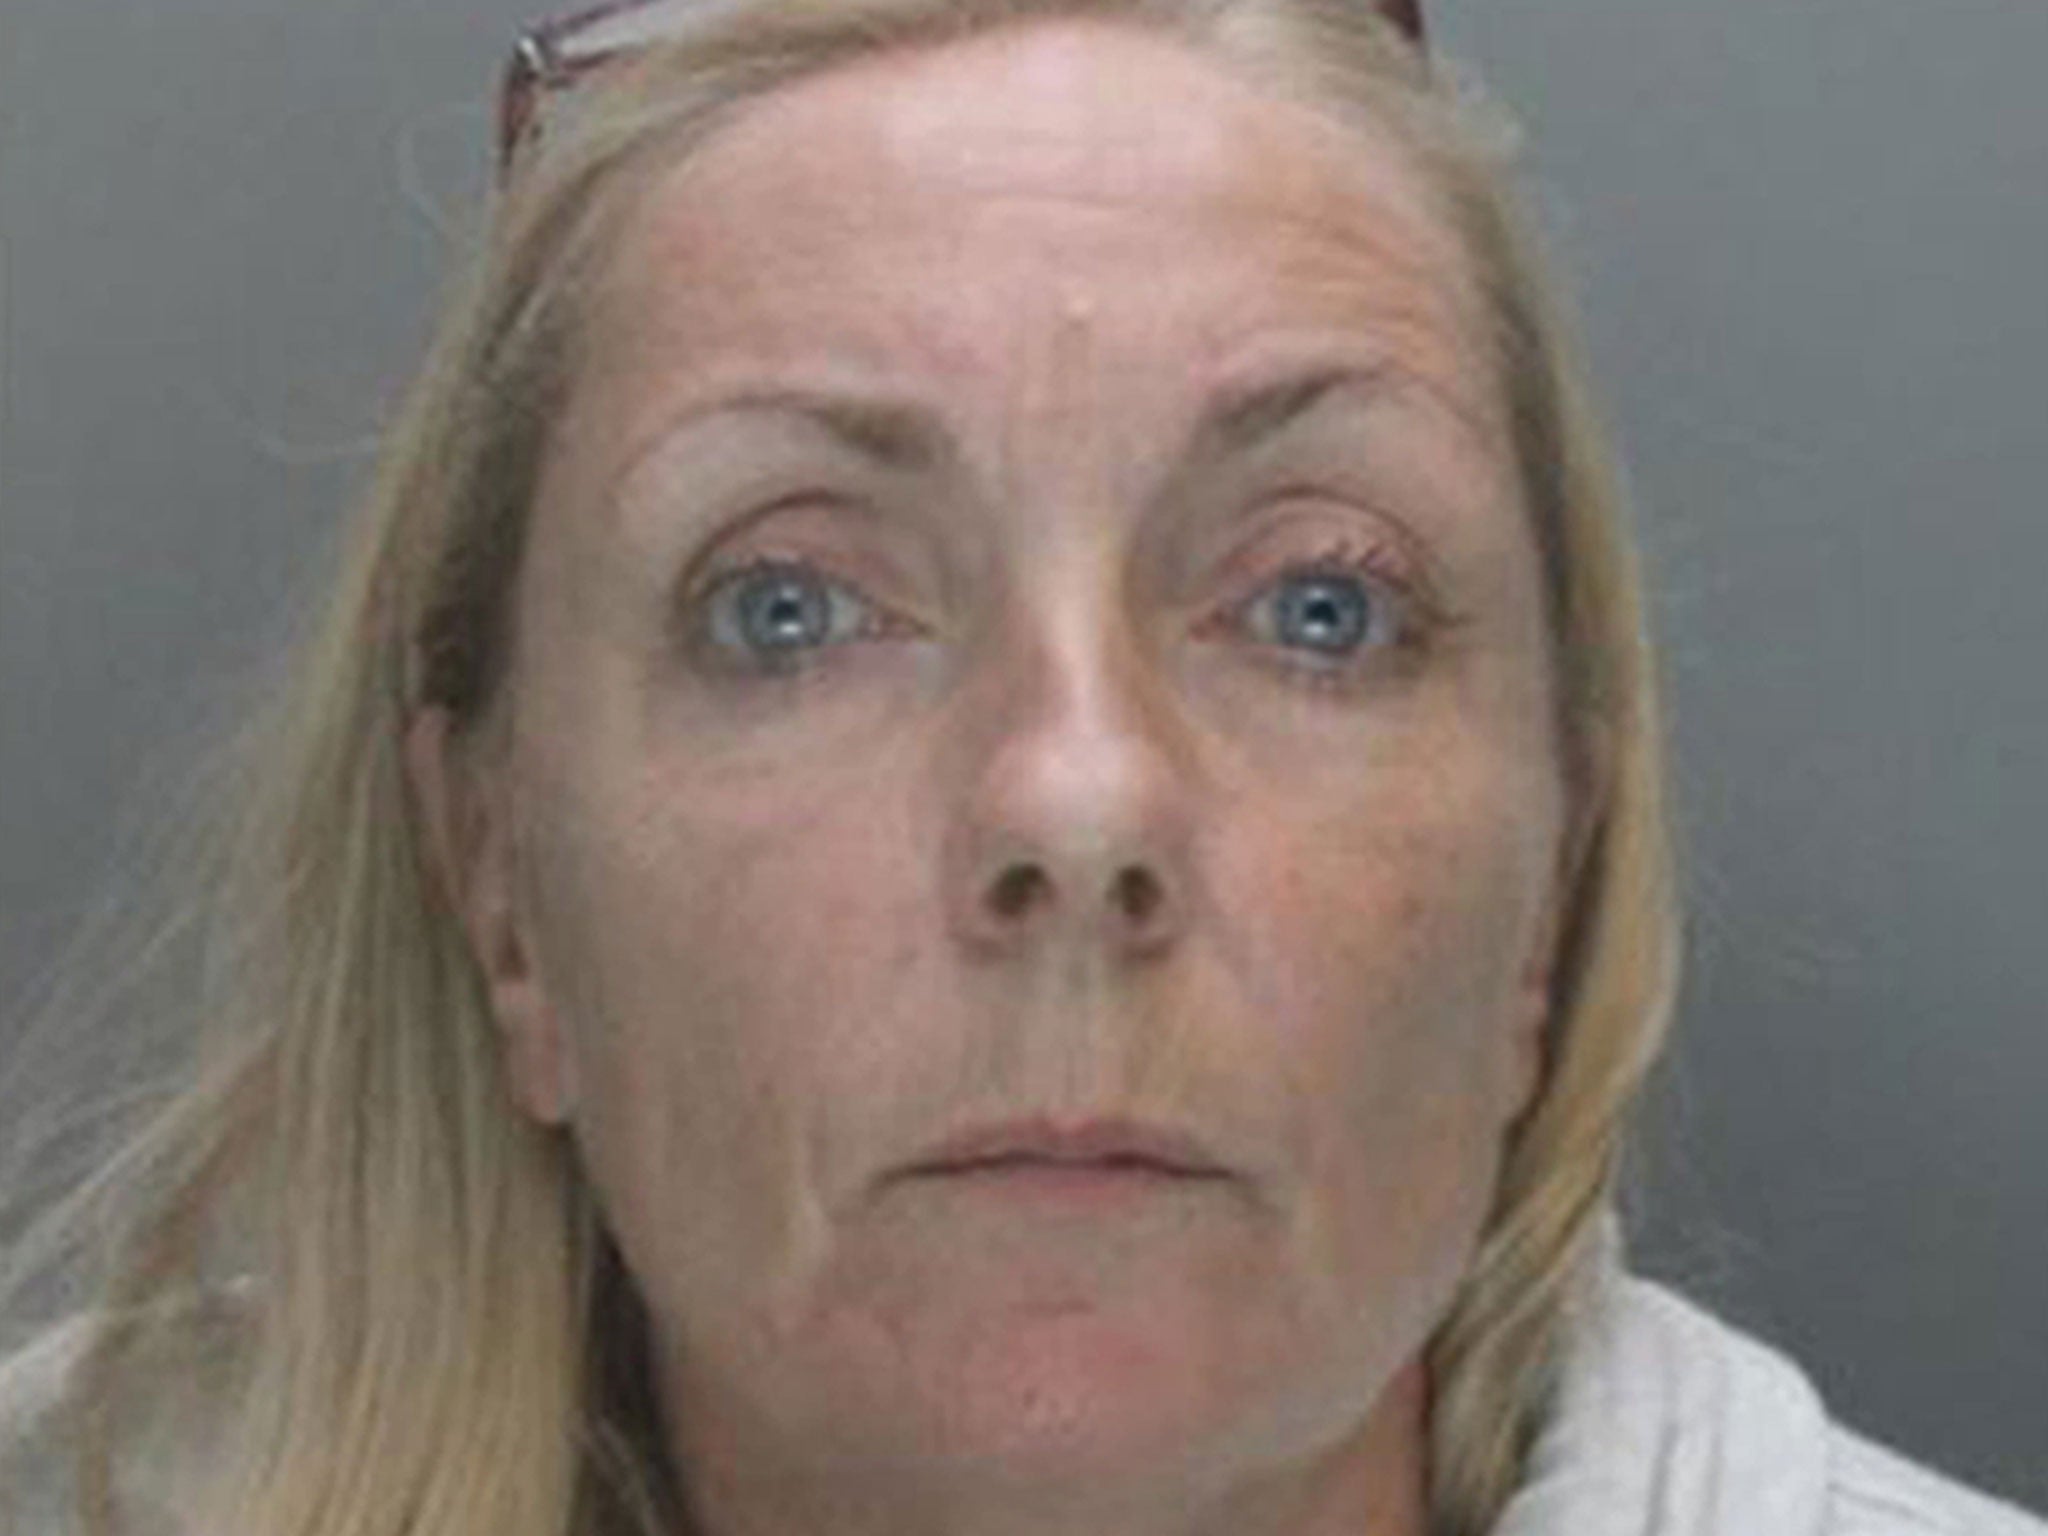 Susan Pain has been jailed for two years after admitting fraud